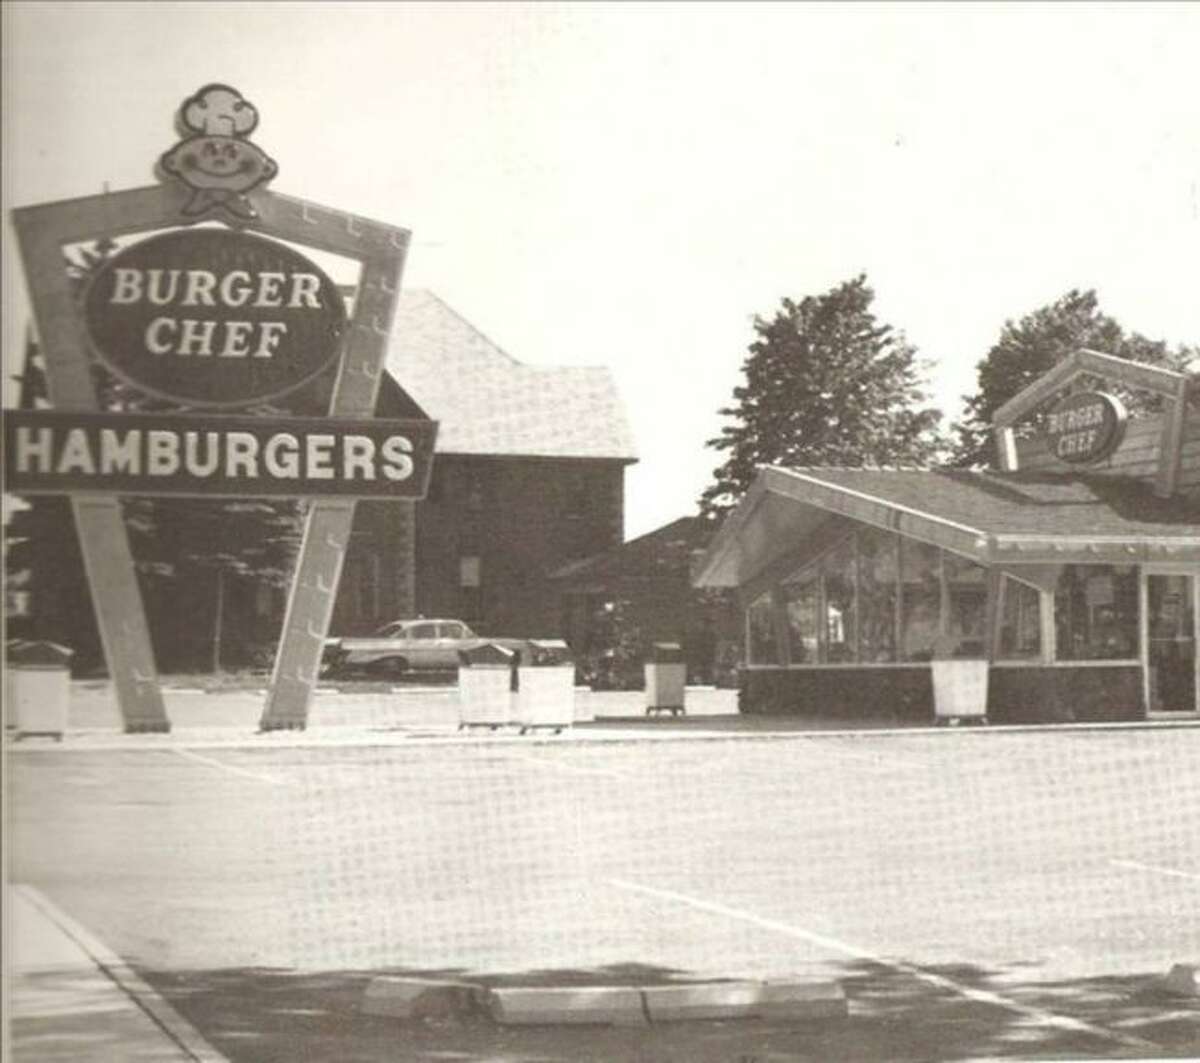 Burger Chef was one of the popular fast food restaurants in Manistee in the 1970s. It was located on Cypress Street at the present location of the A & W Restaurant.